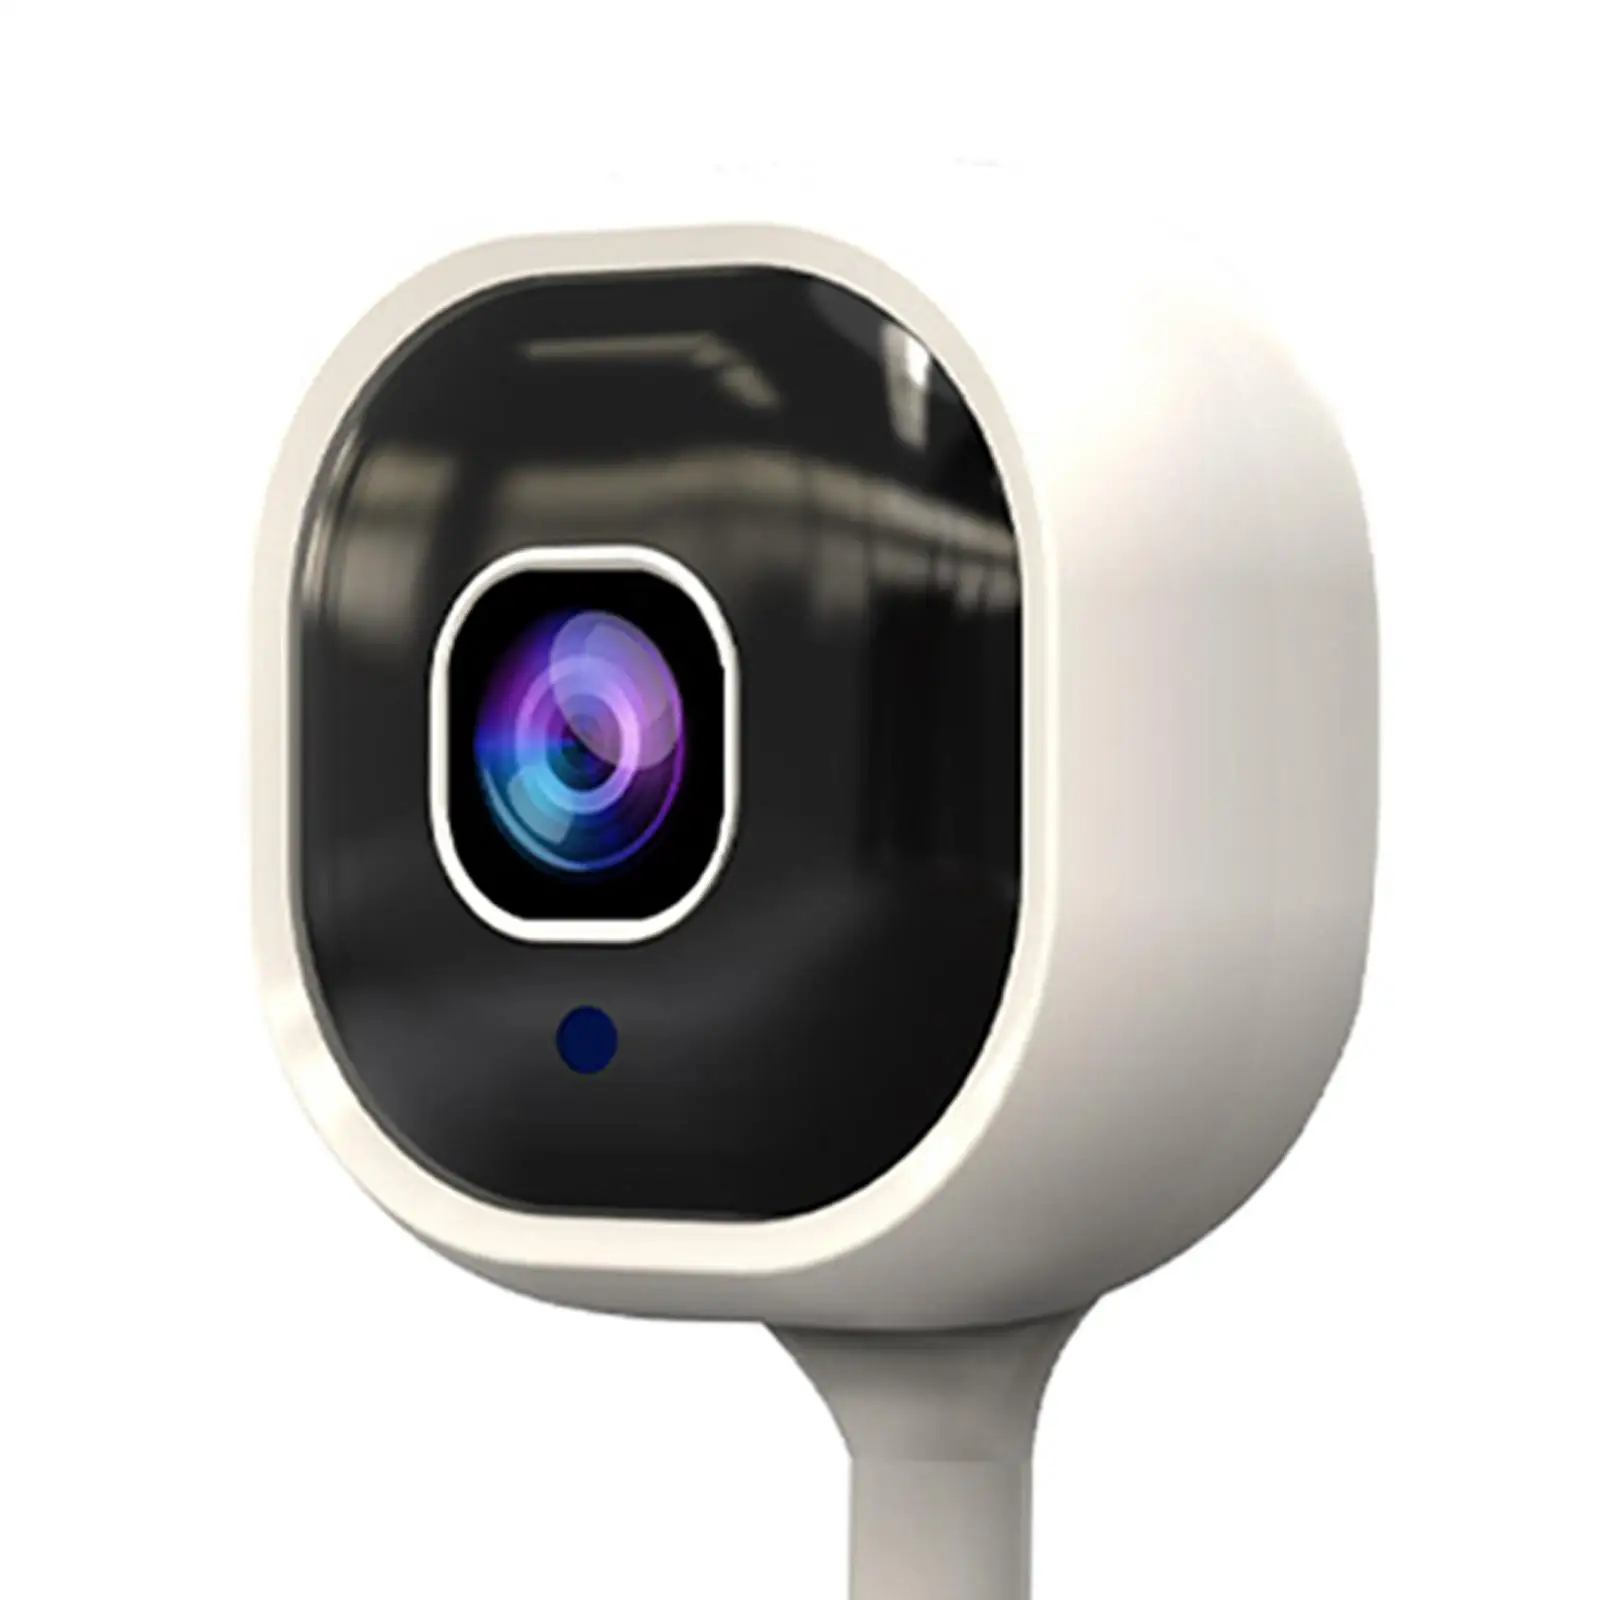 Surveillance Camera Indoor Monitor Camera Video Playback Professional Infrared security Camera for Business